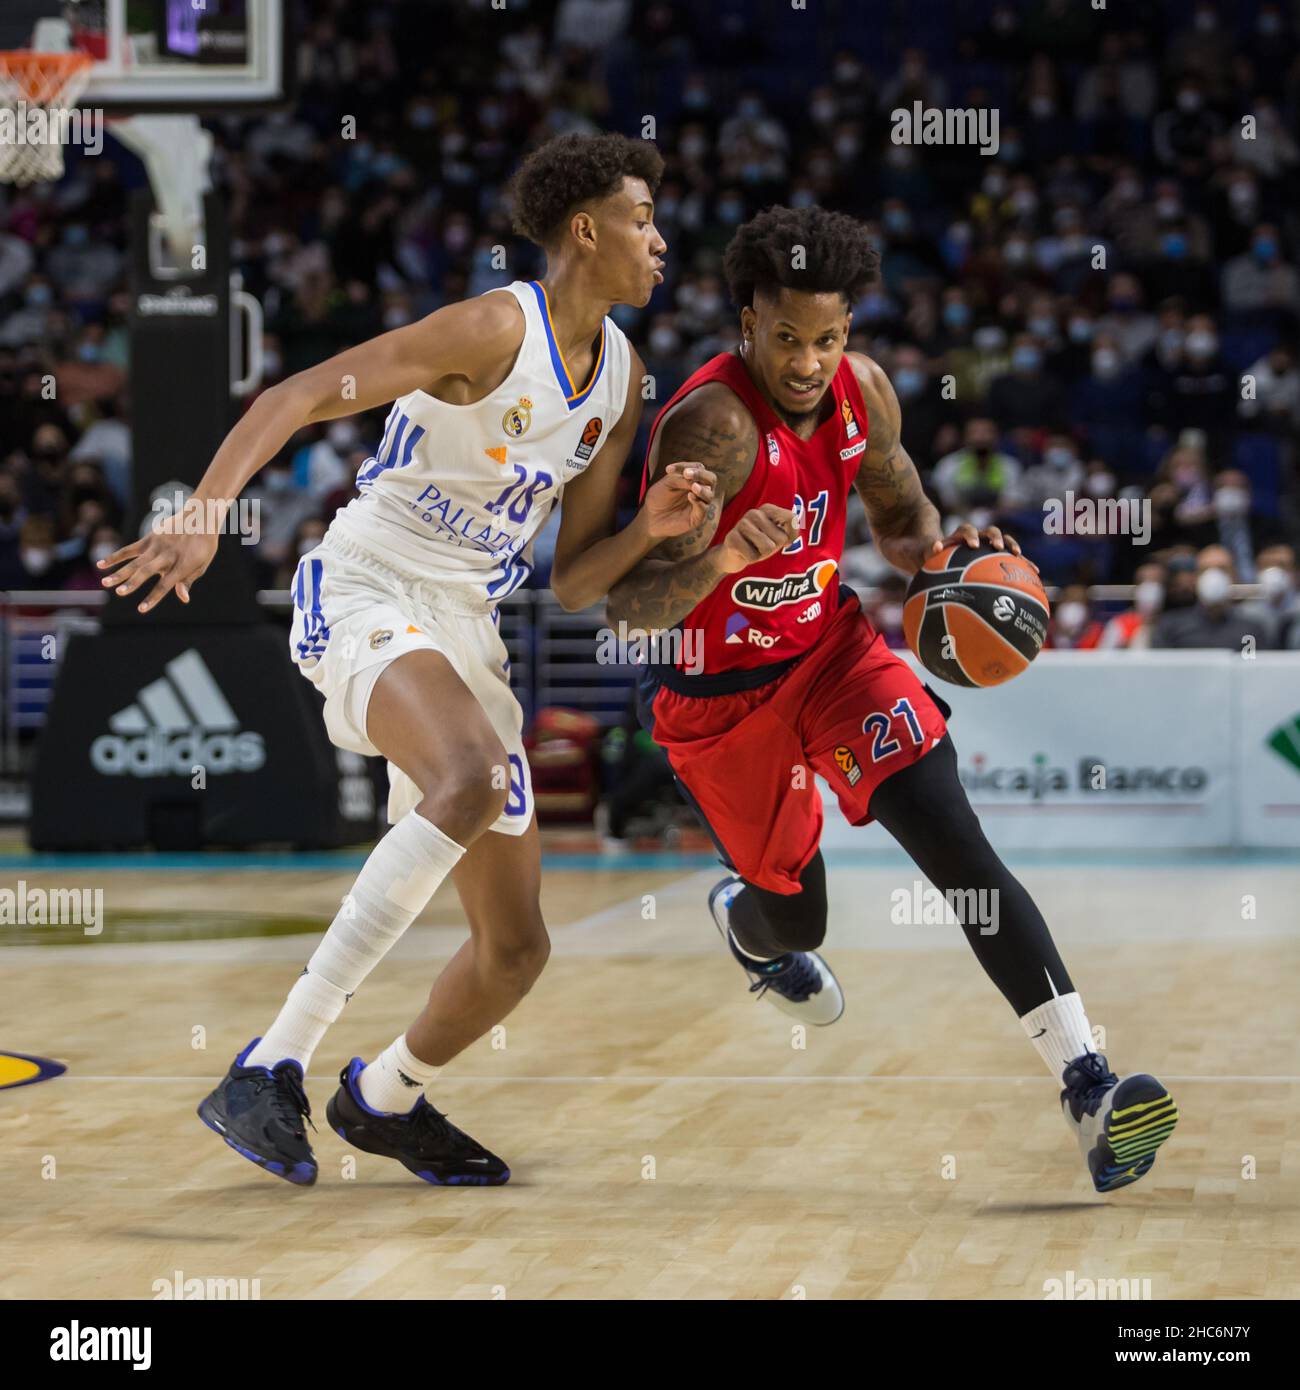 Madrid, Spain. 23rd Dec, 2021. Baba Miller (L) and Will Clyburn (R) during Real Madrid victory over CSKA Moscow (71 - 65) in Turkish Airlines Euroleague regular season (round 17) celebrated in Madrid (Spain) at Wizink Center. December 23rd 2021. (Photo by Juan Carlos García Mate/Pacific Press/Sipa USA) Credit: Sipa USA/Alamy Live News Stock Photo